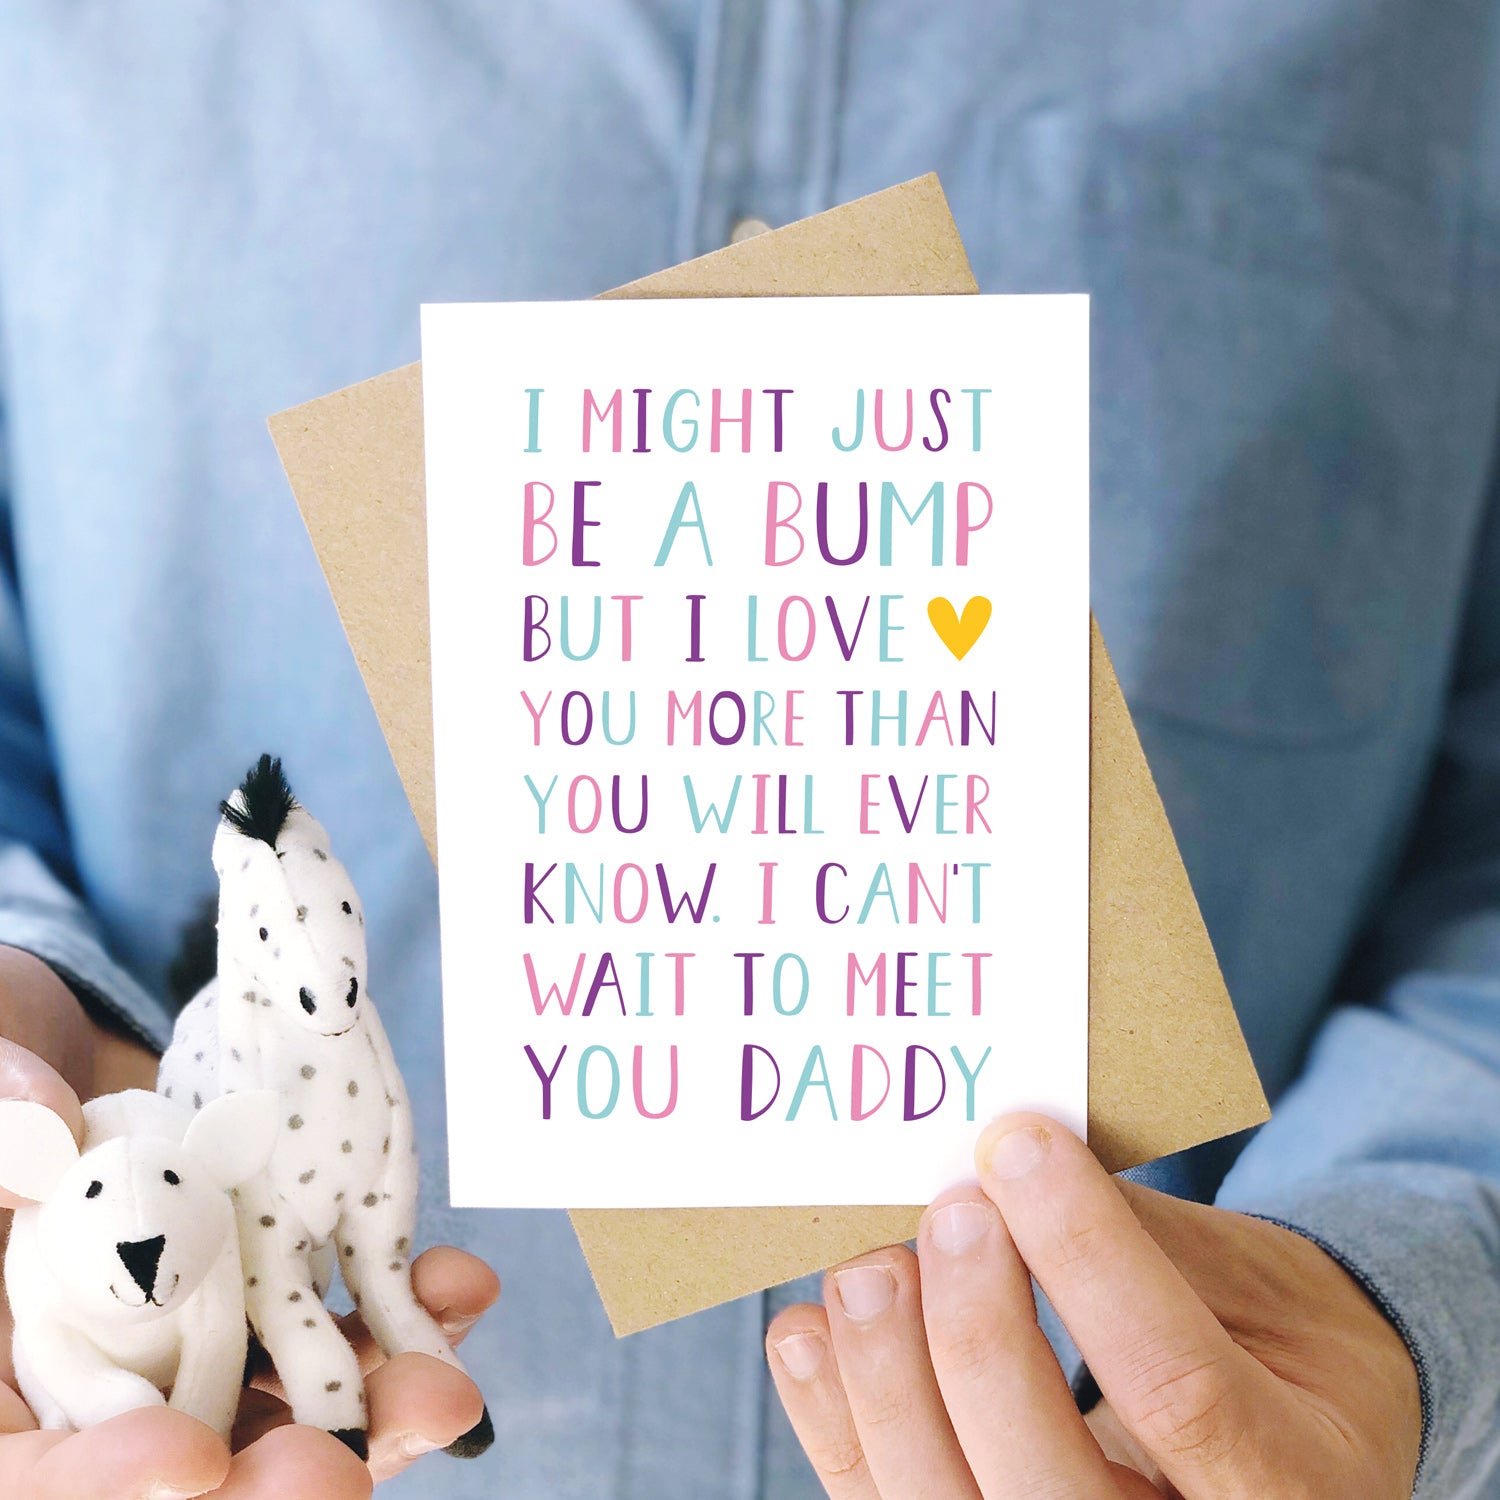 I can't wait to meet you card from the bump to daddy fathers day card photographed being held by a man in a blue button up shirt and with two cuddly toys. This design is shown in varying shades of pink, purple and blue and a pop of yellow.